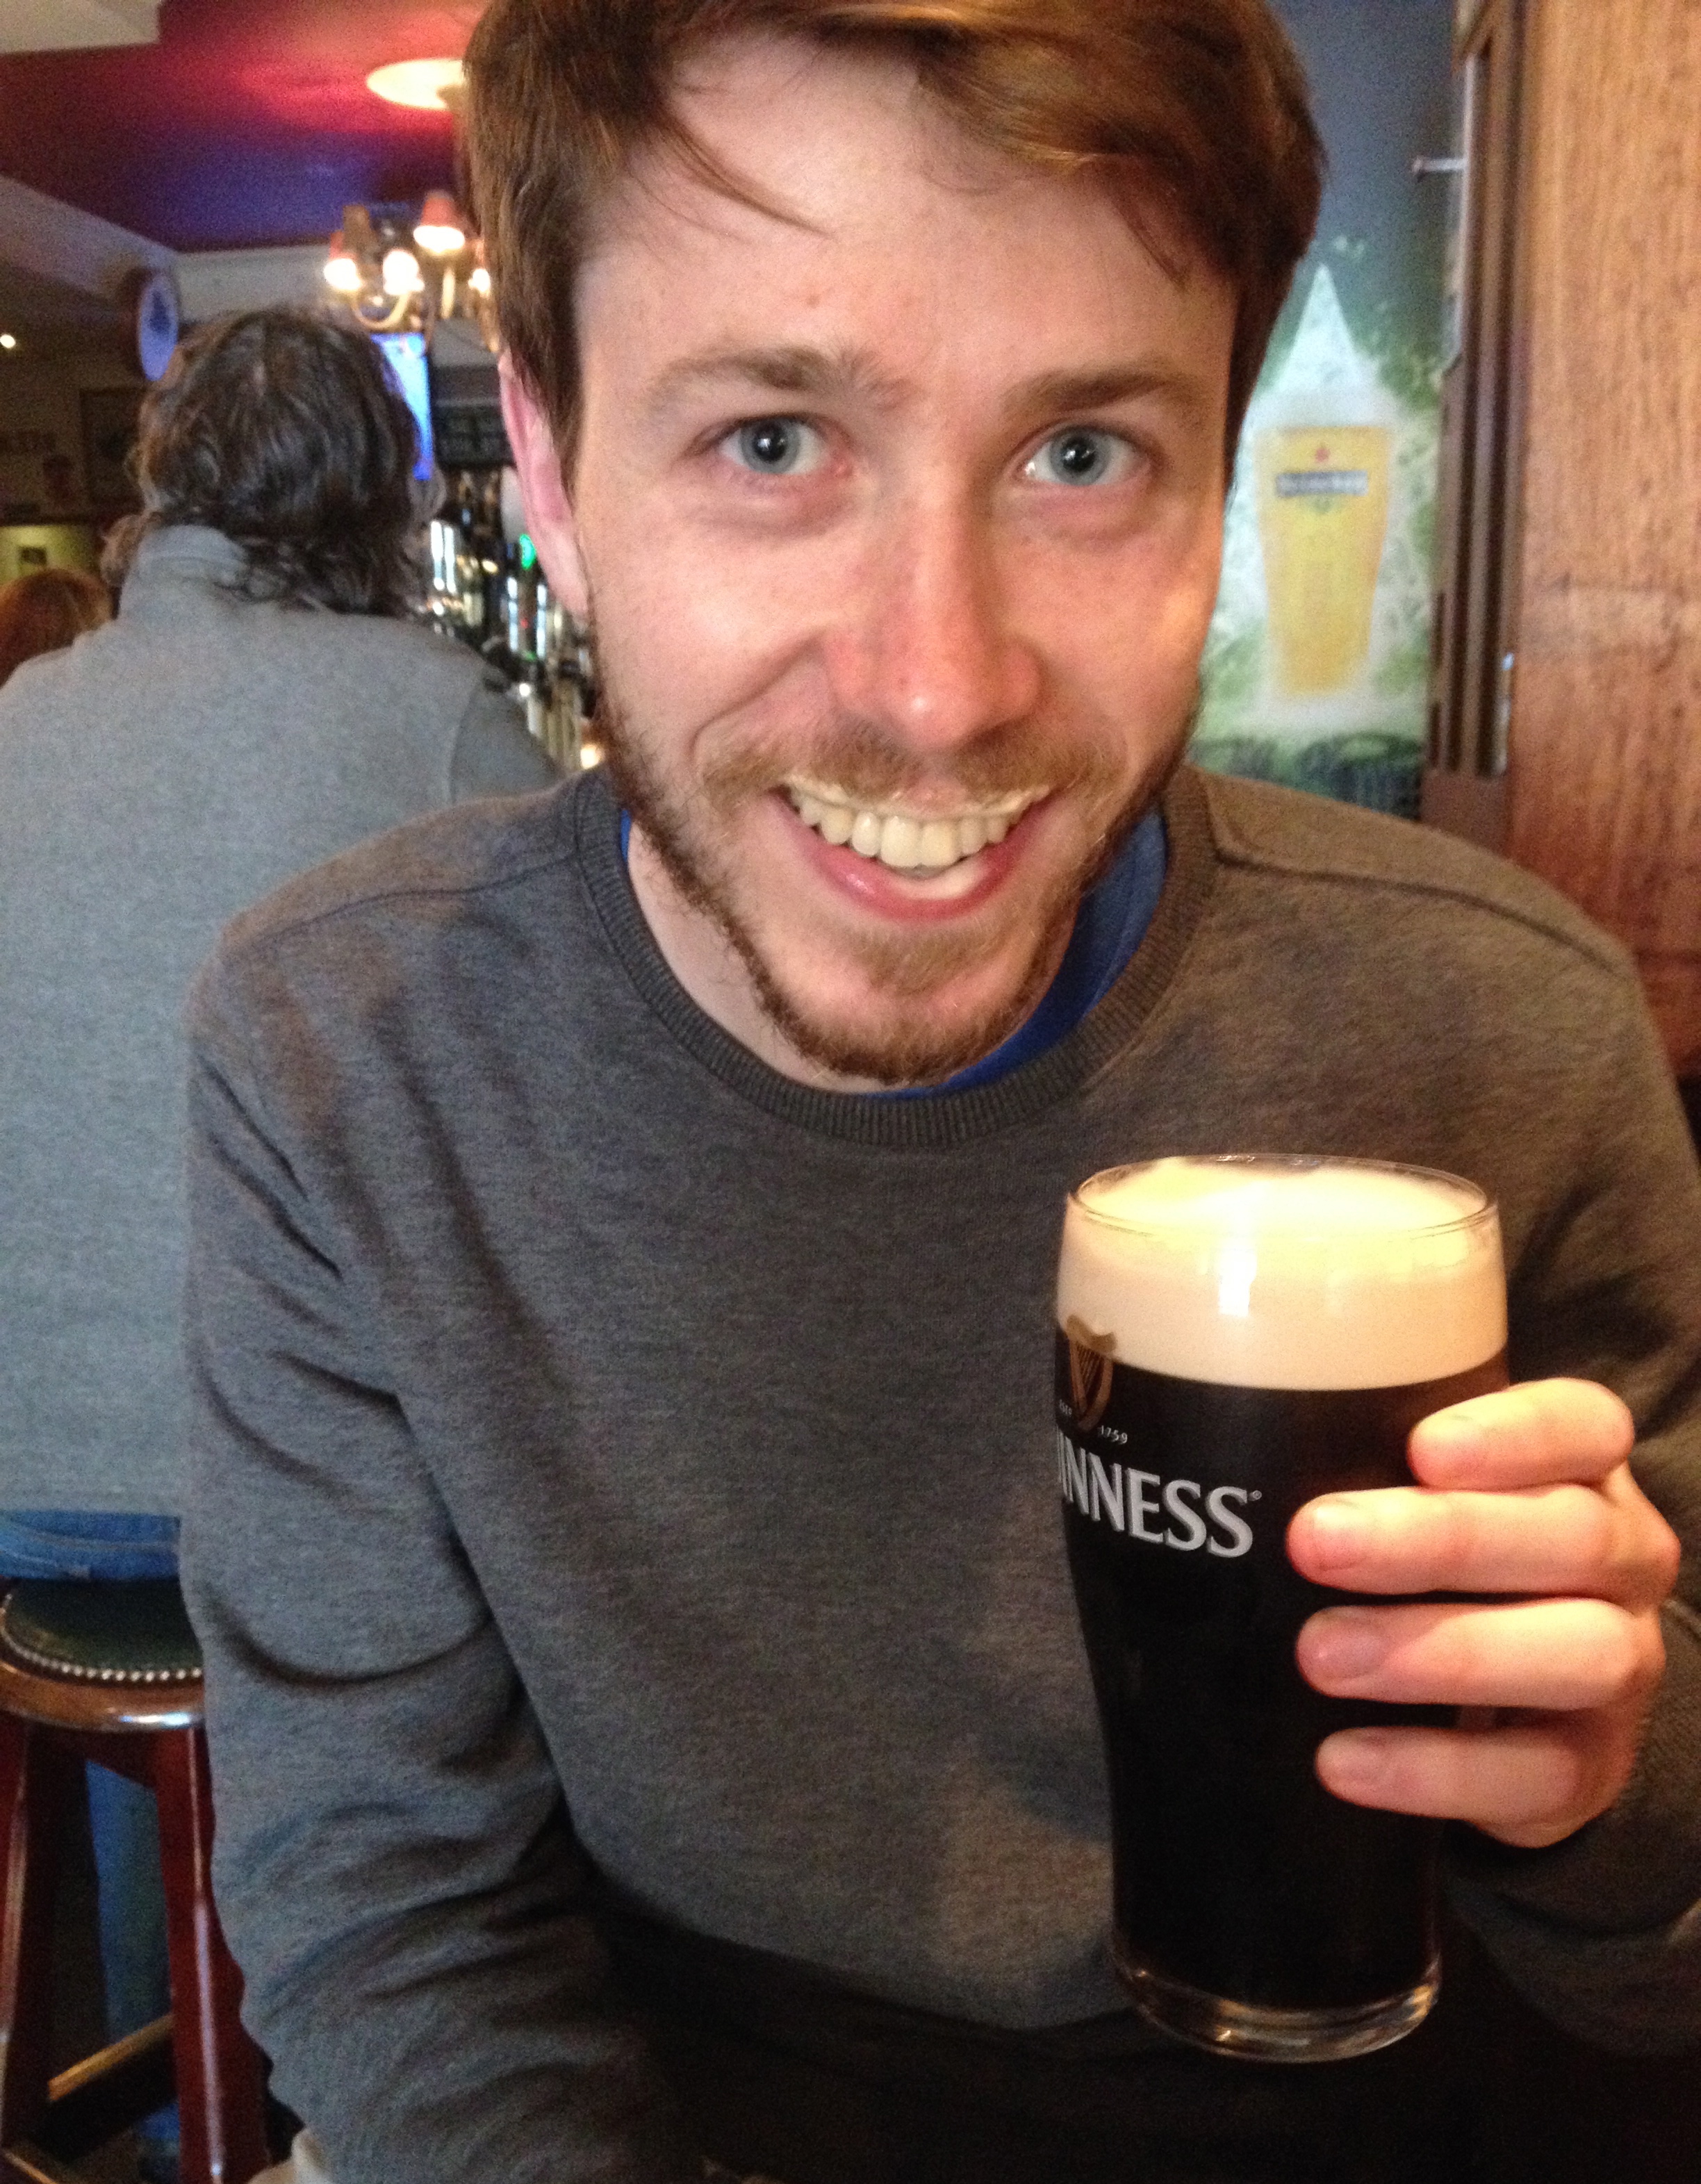 Joey with a Guiness